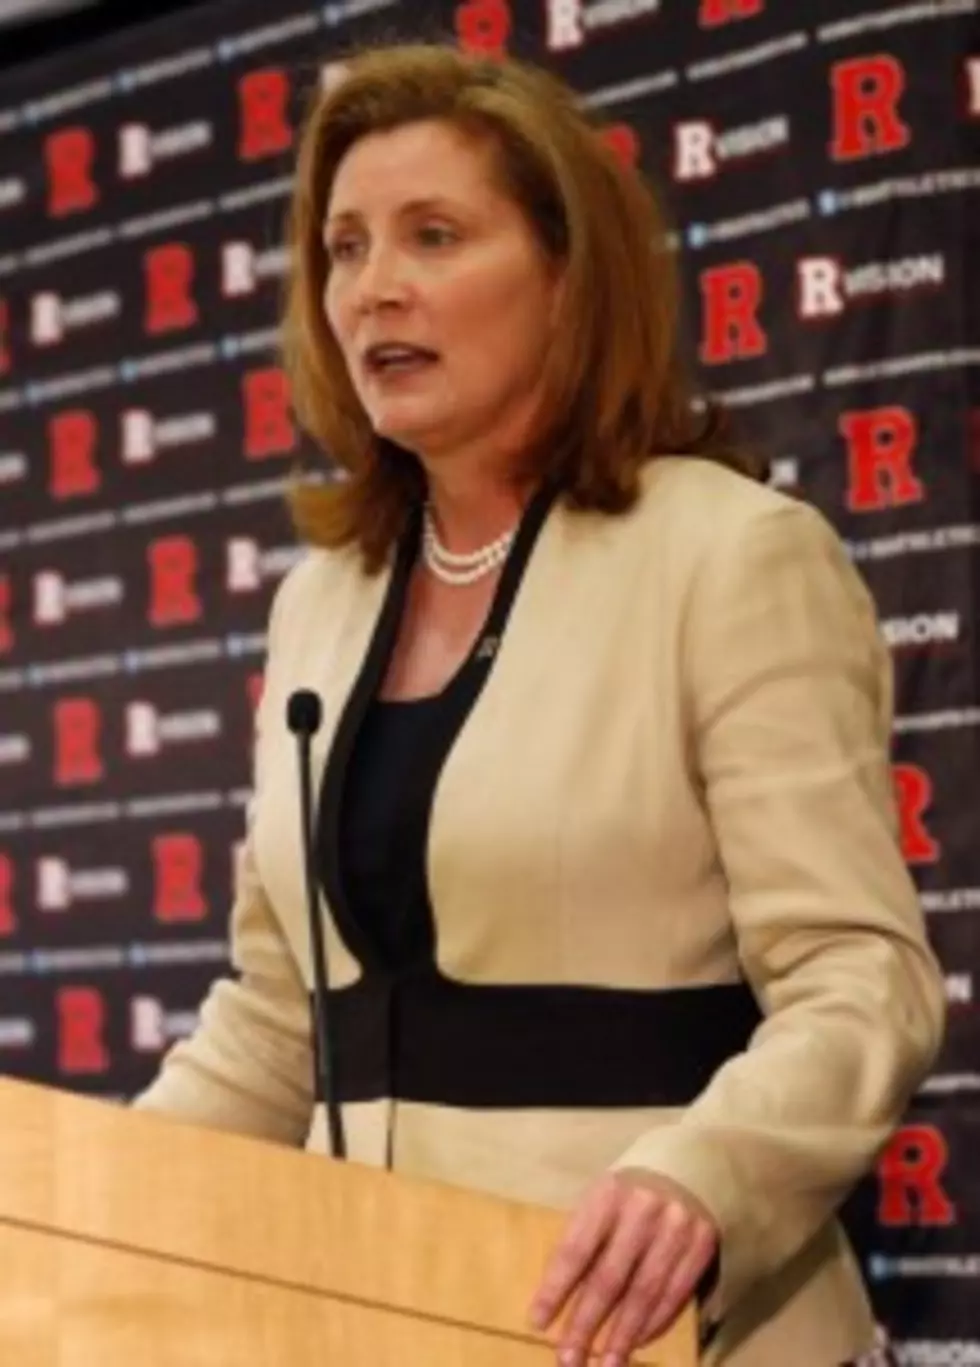 Rutgers paid $70,000 in Order to Hire Julie Hermann.  Would You Attend Any of Their Events or Allow Your Kids to Play There? [POLL]